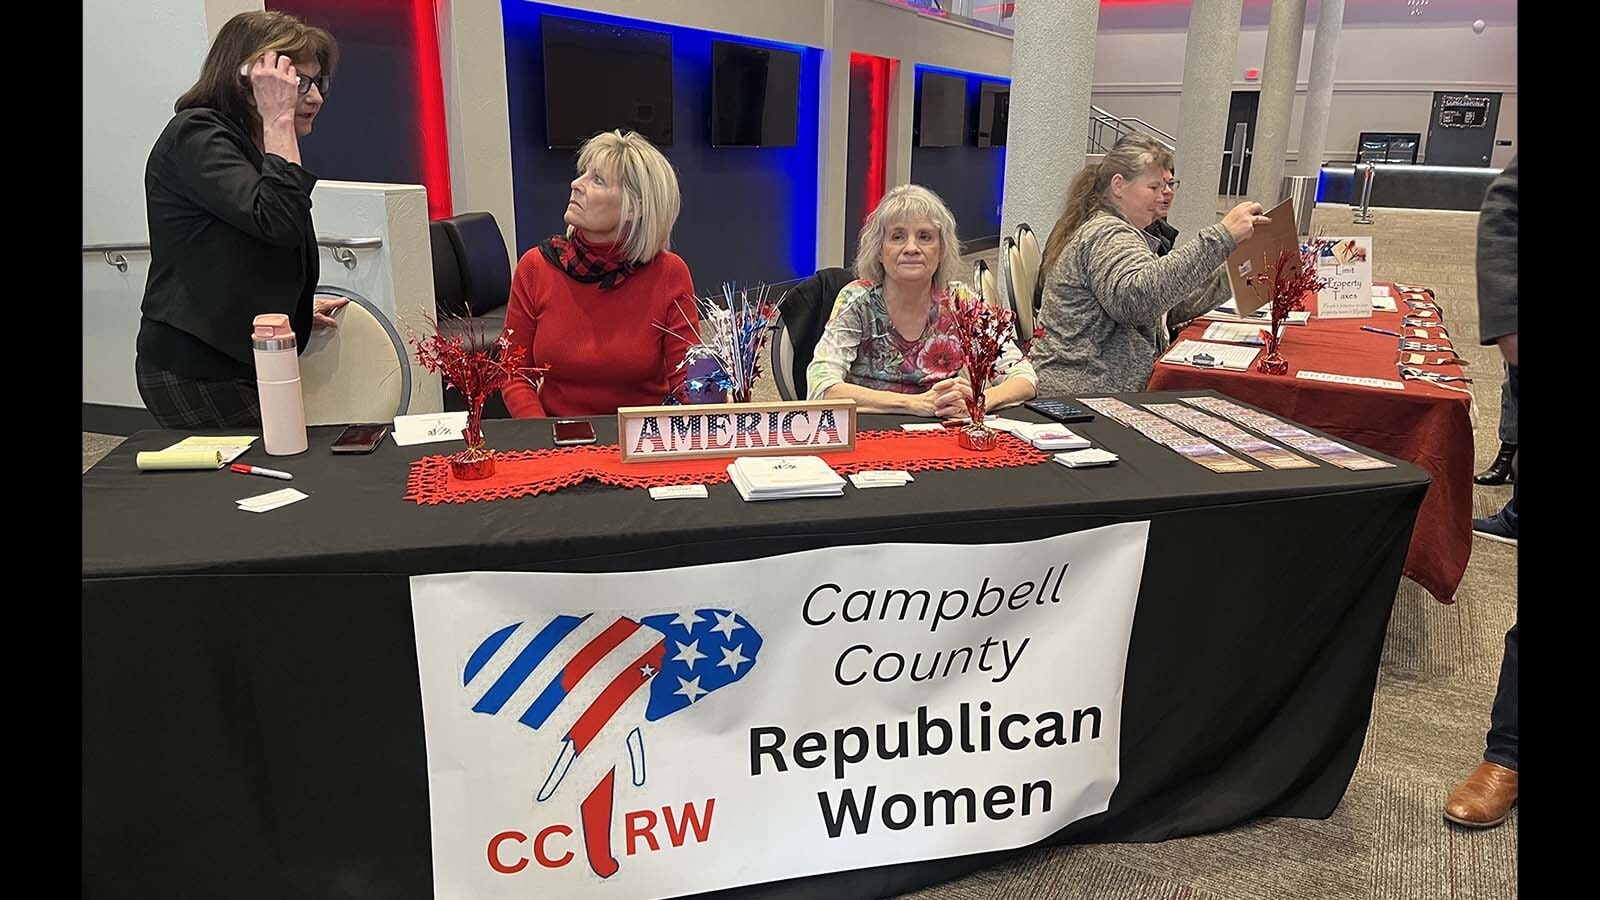 Members of the Campbell County Republican Women at a table at Saturday's local GOP meeting in Gillette.